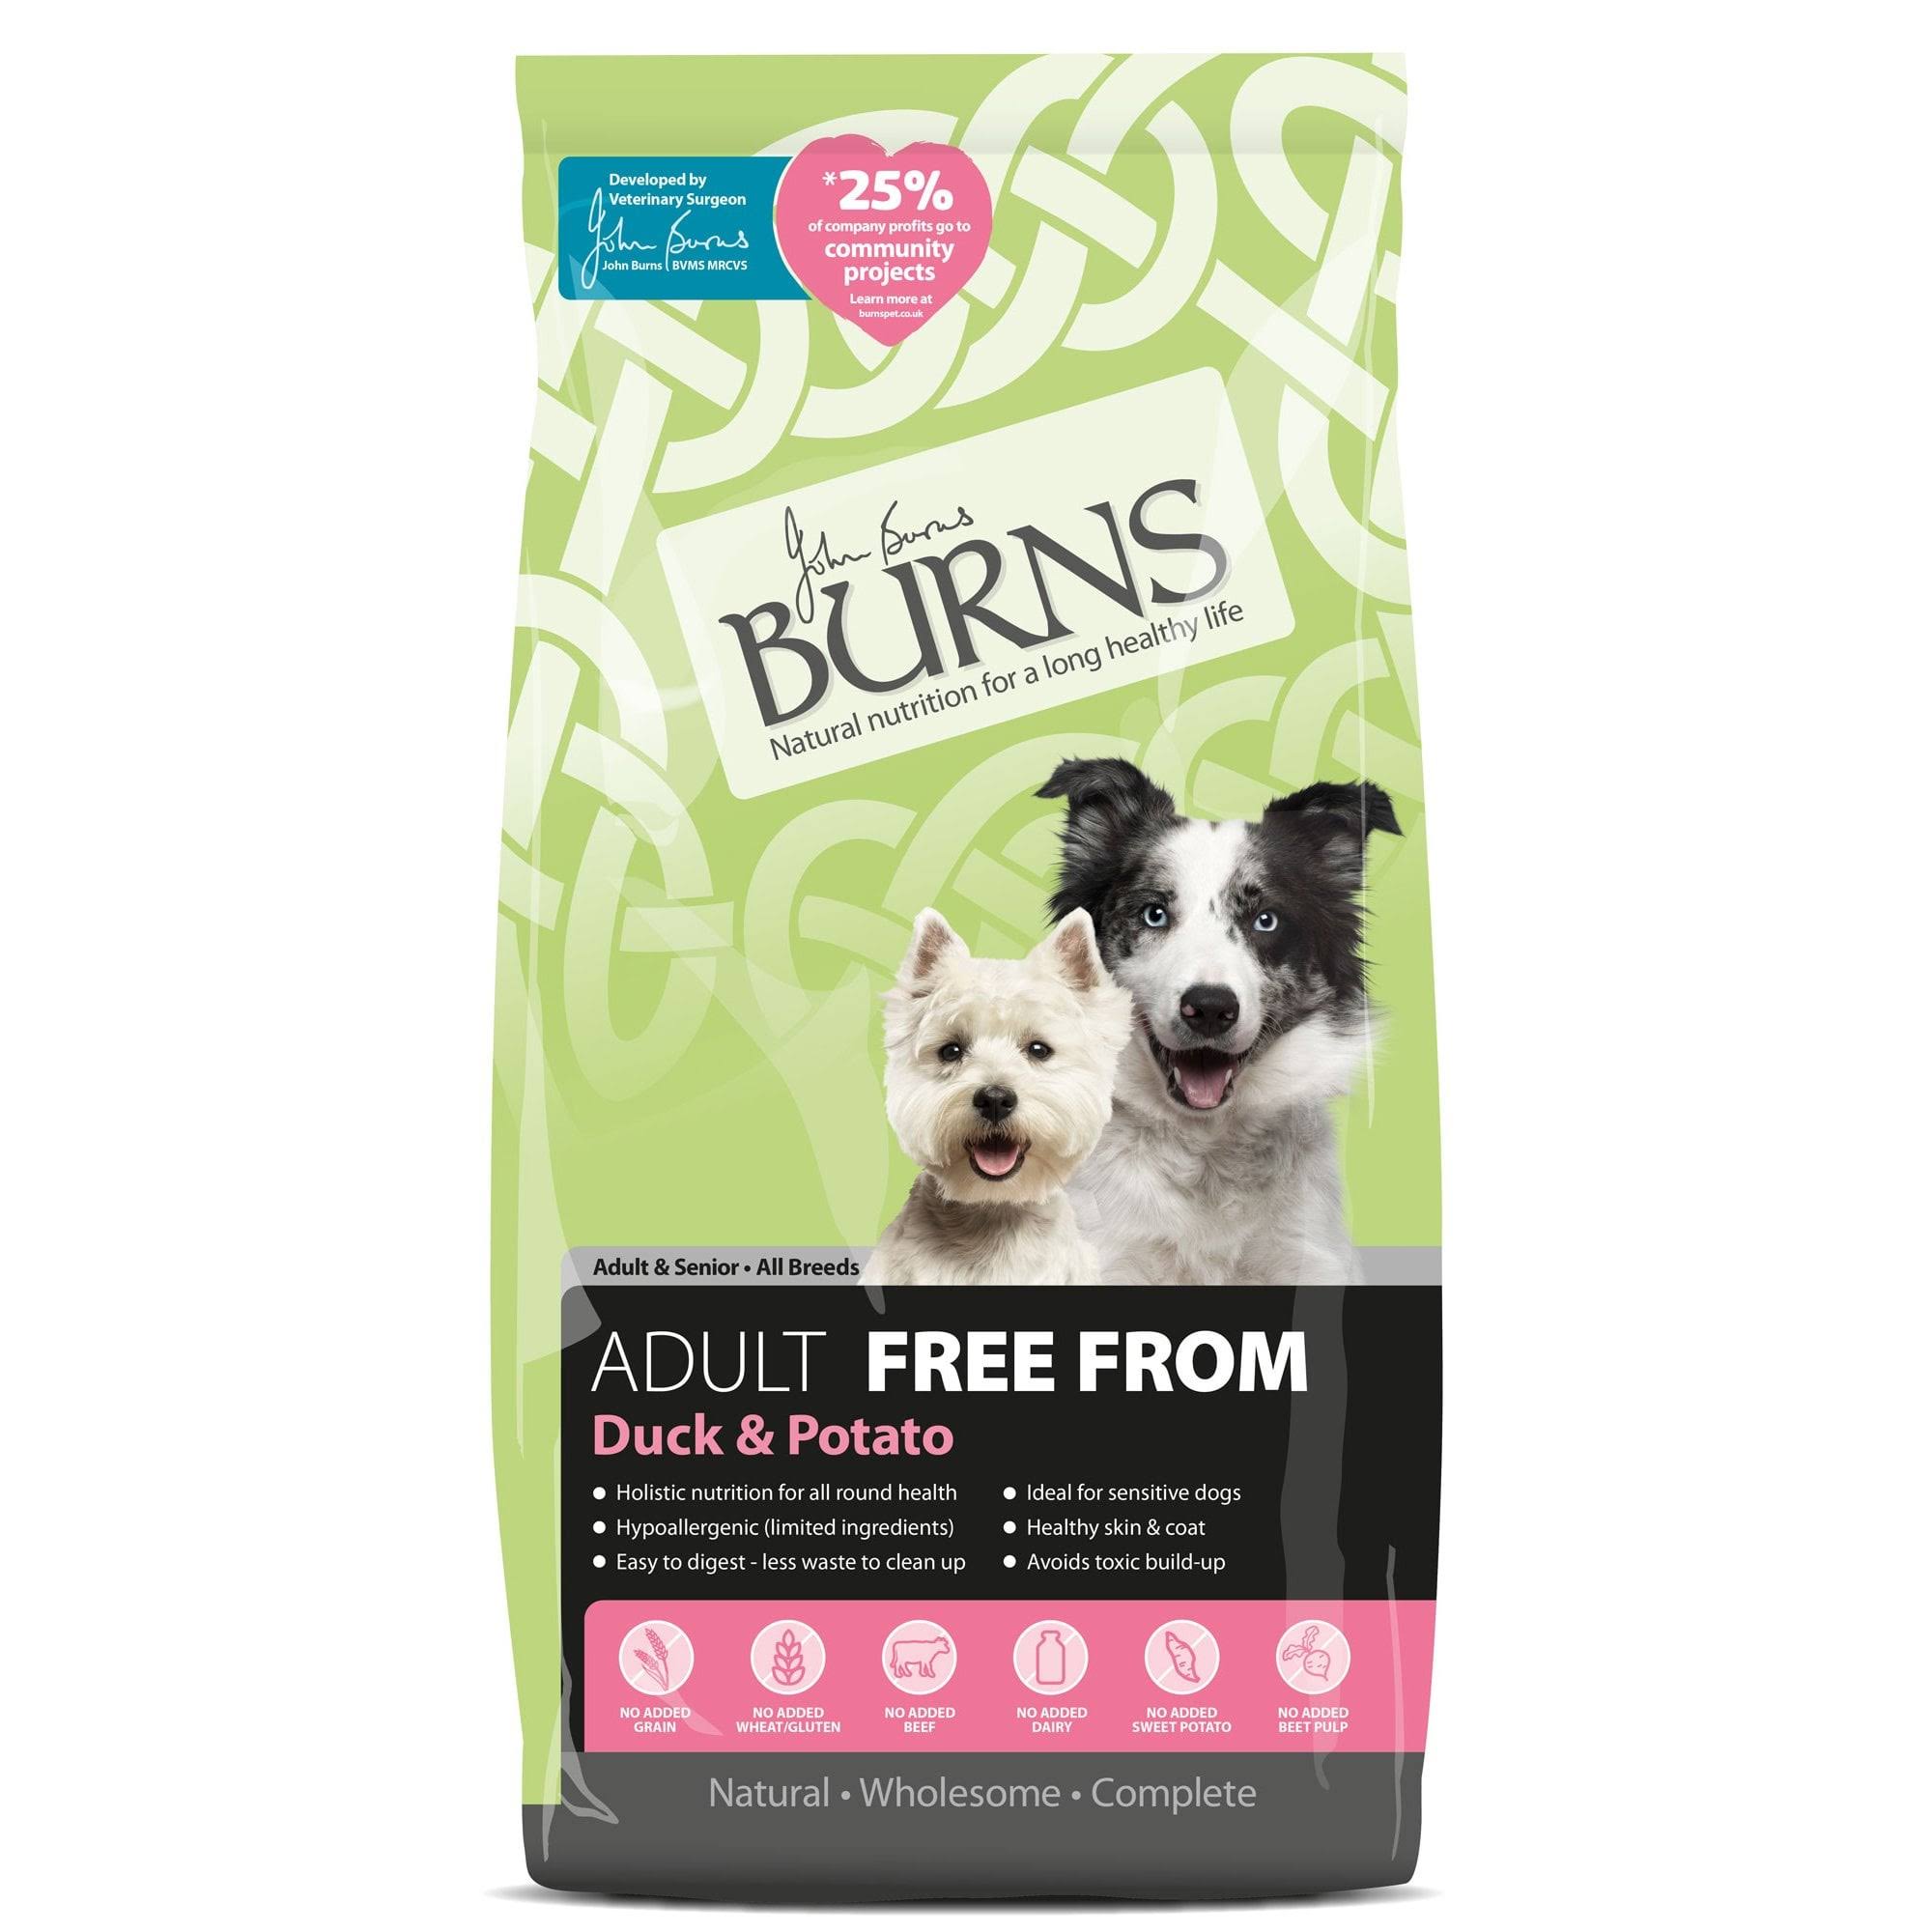 Burns Pet Nutrition Hypoallergenic Complete Dry Dog Food Adult and Senior Dog Grain Free Duck and Potato Grain Free 6 kg